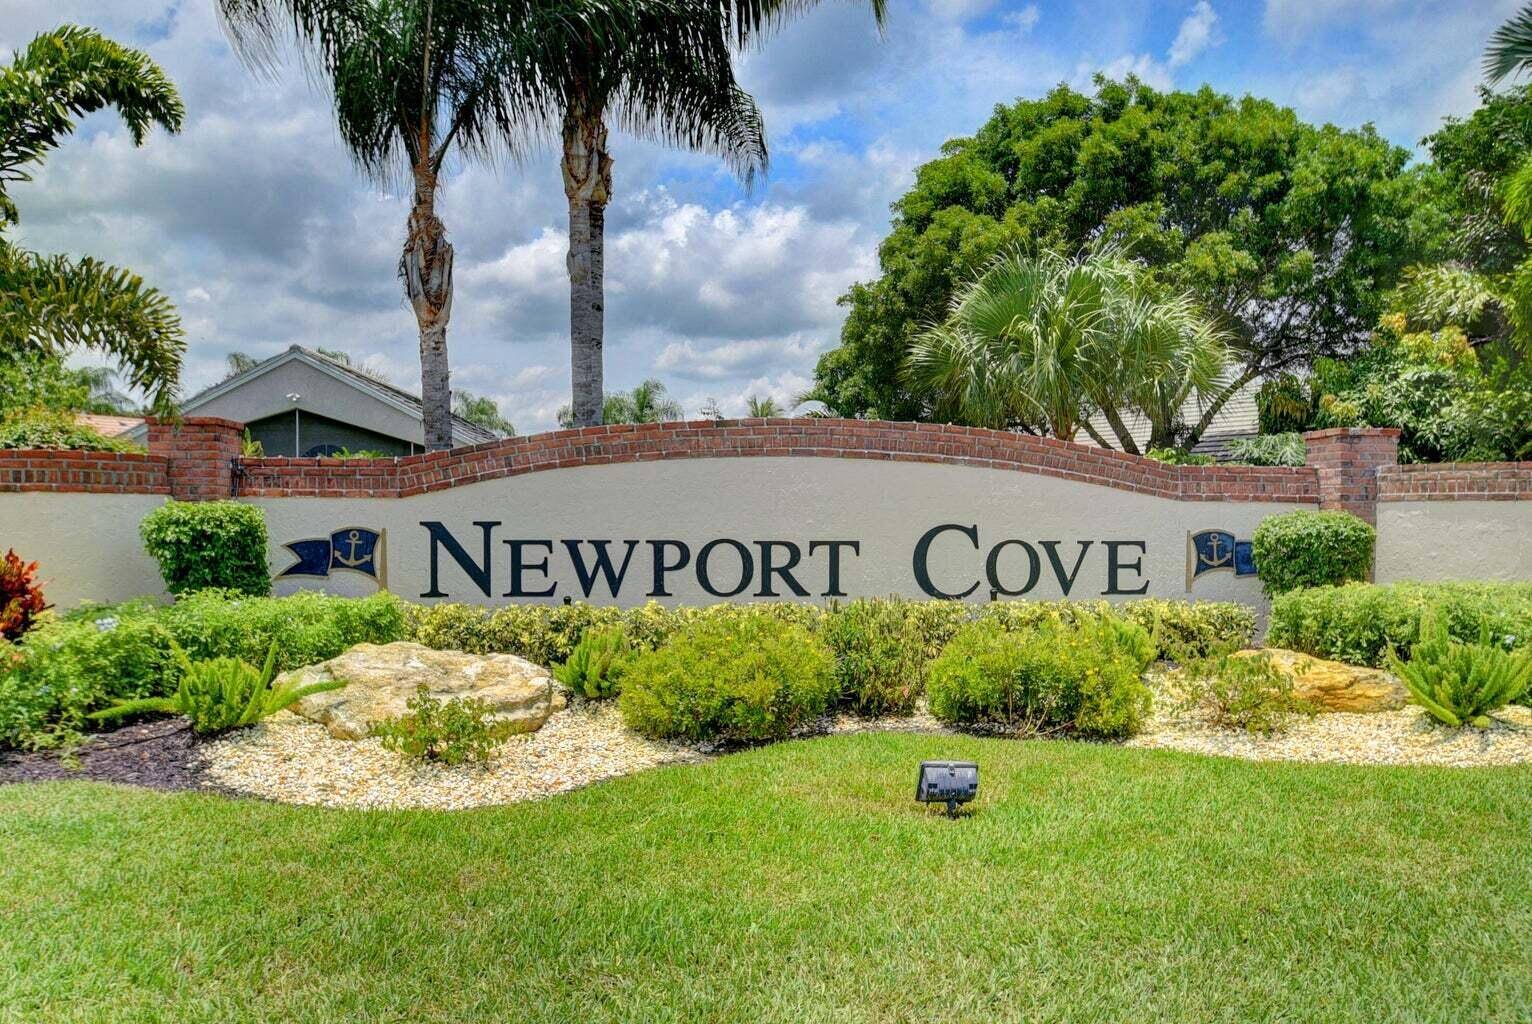 WELCOME to Newport Cove, a tranquil, hidden gem in Delray Beach !